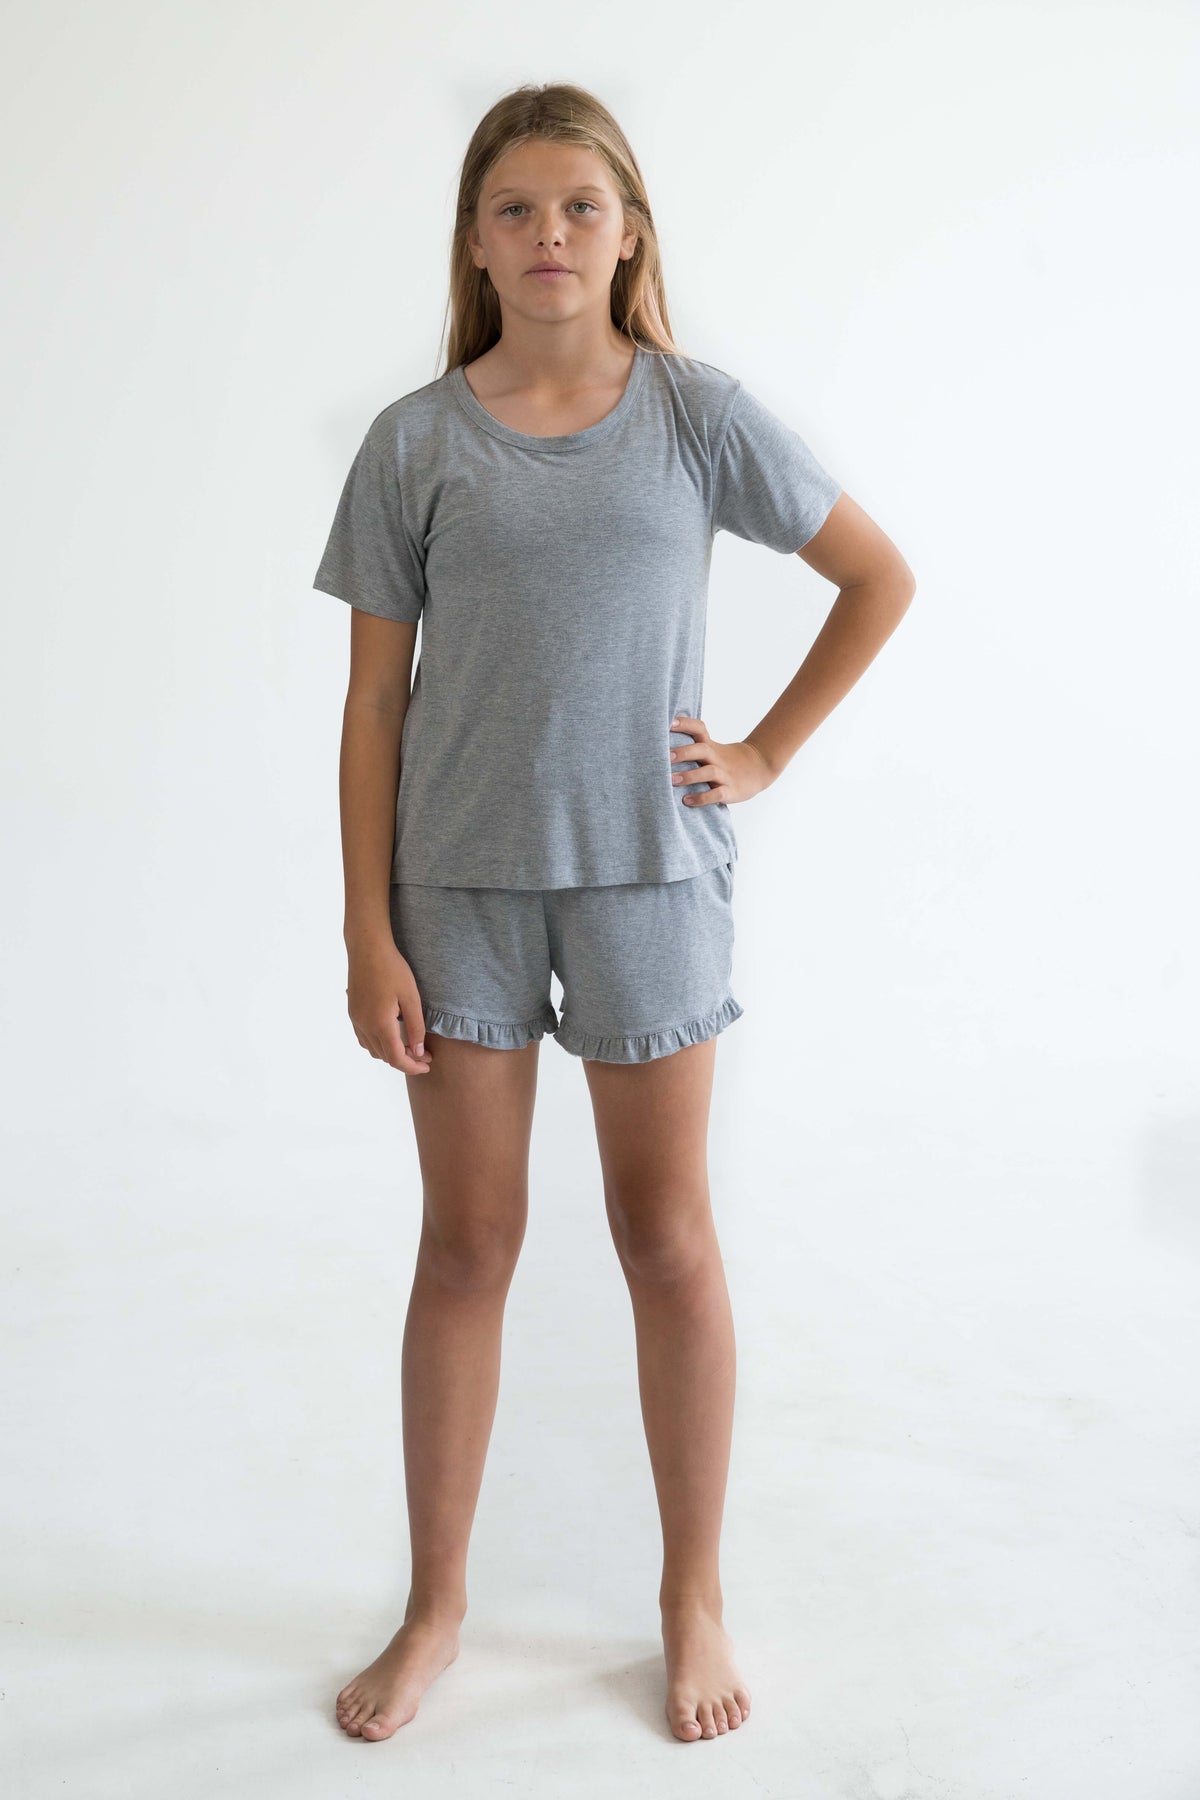 grey teen girls summer pyjamas set shorts with pockets and frill and short sleeve top by Love Haidee Australia front